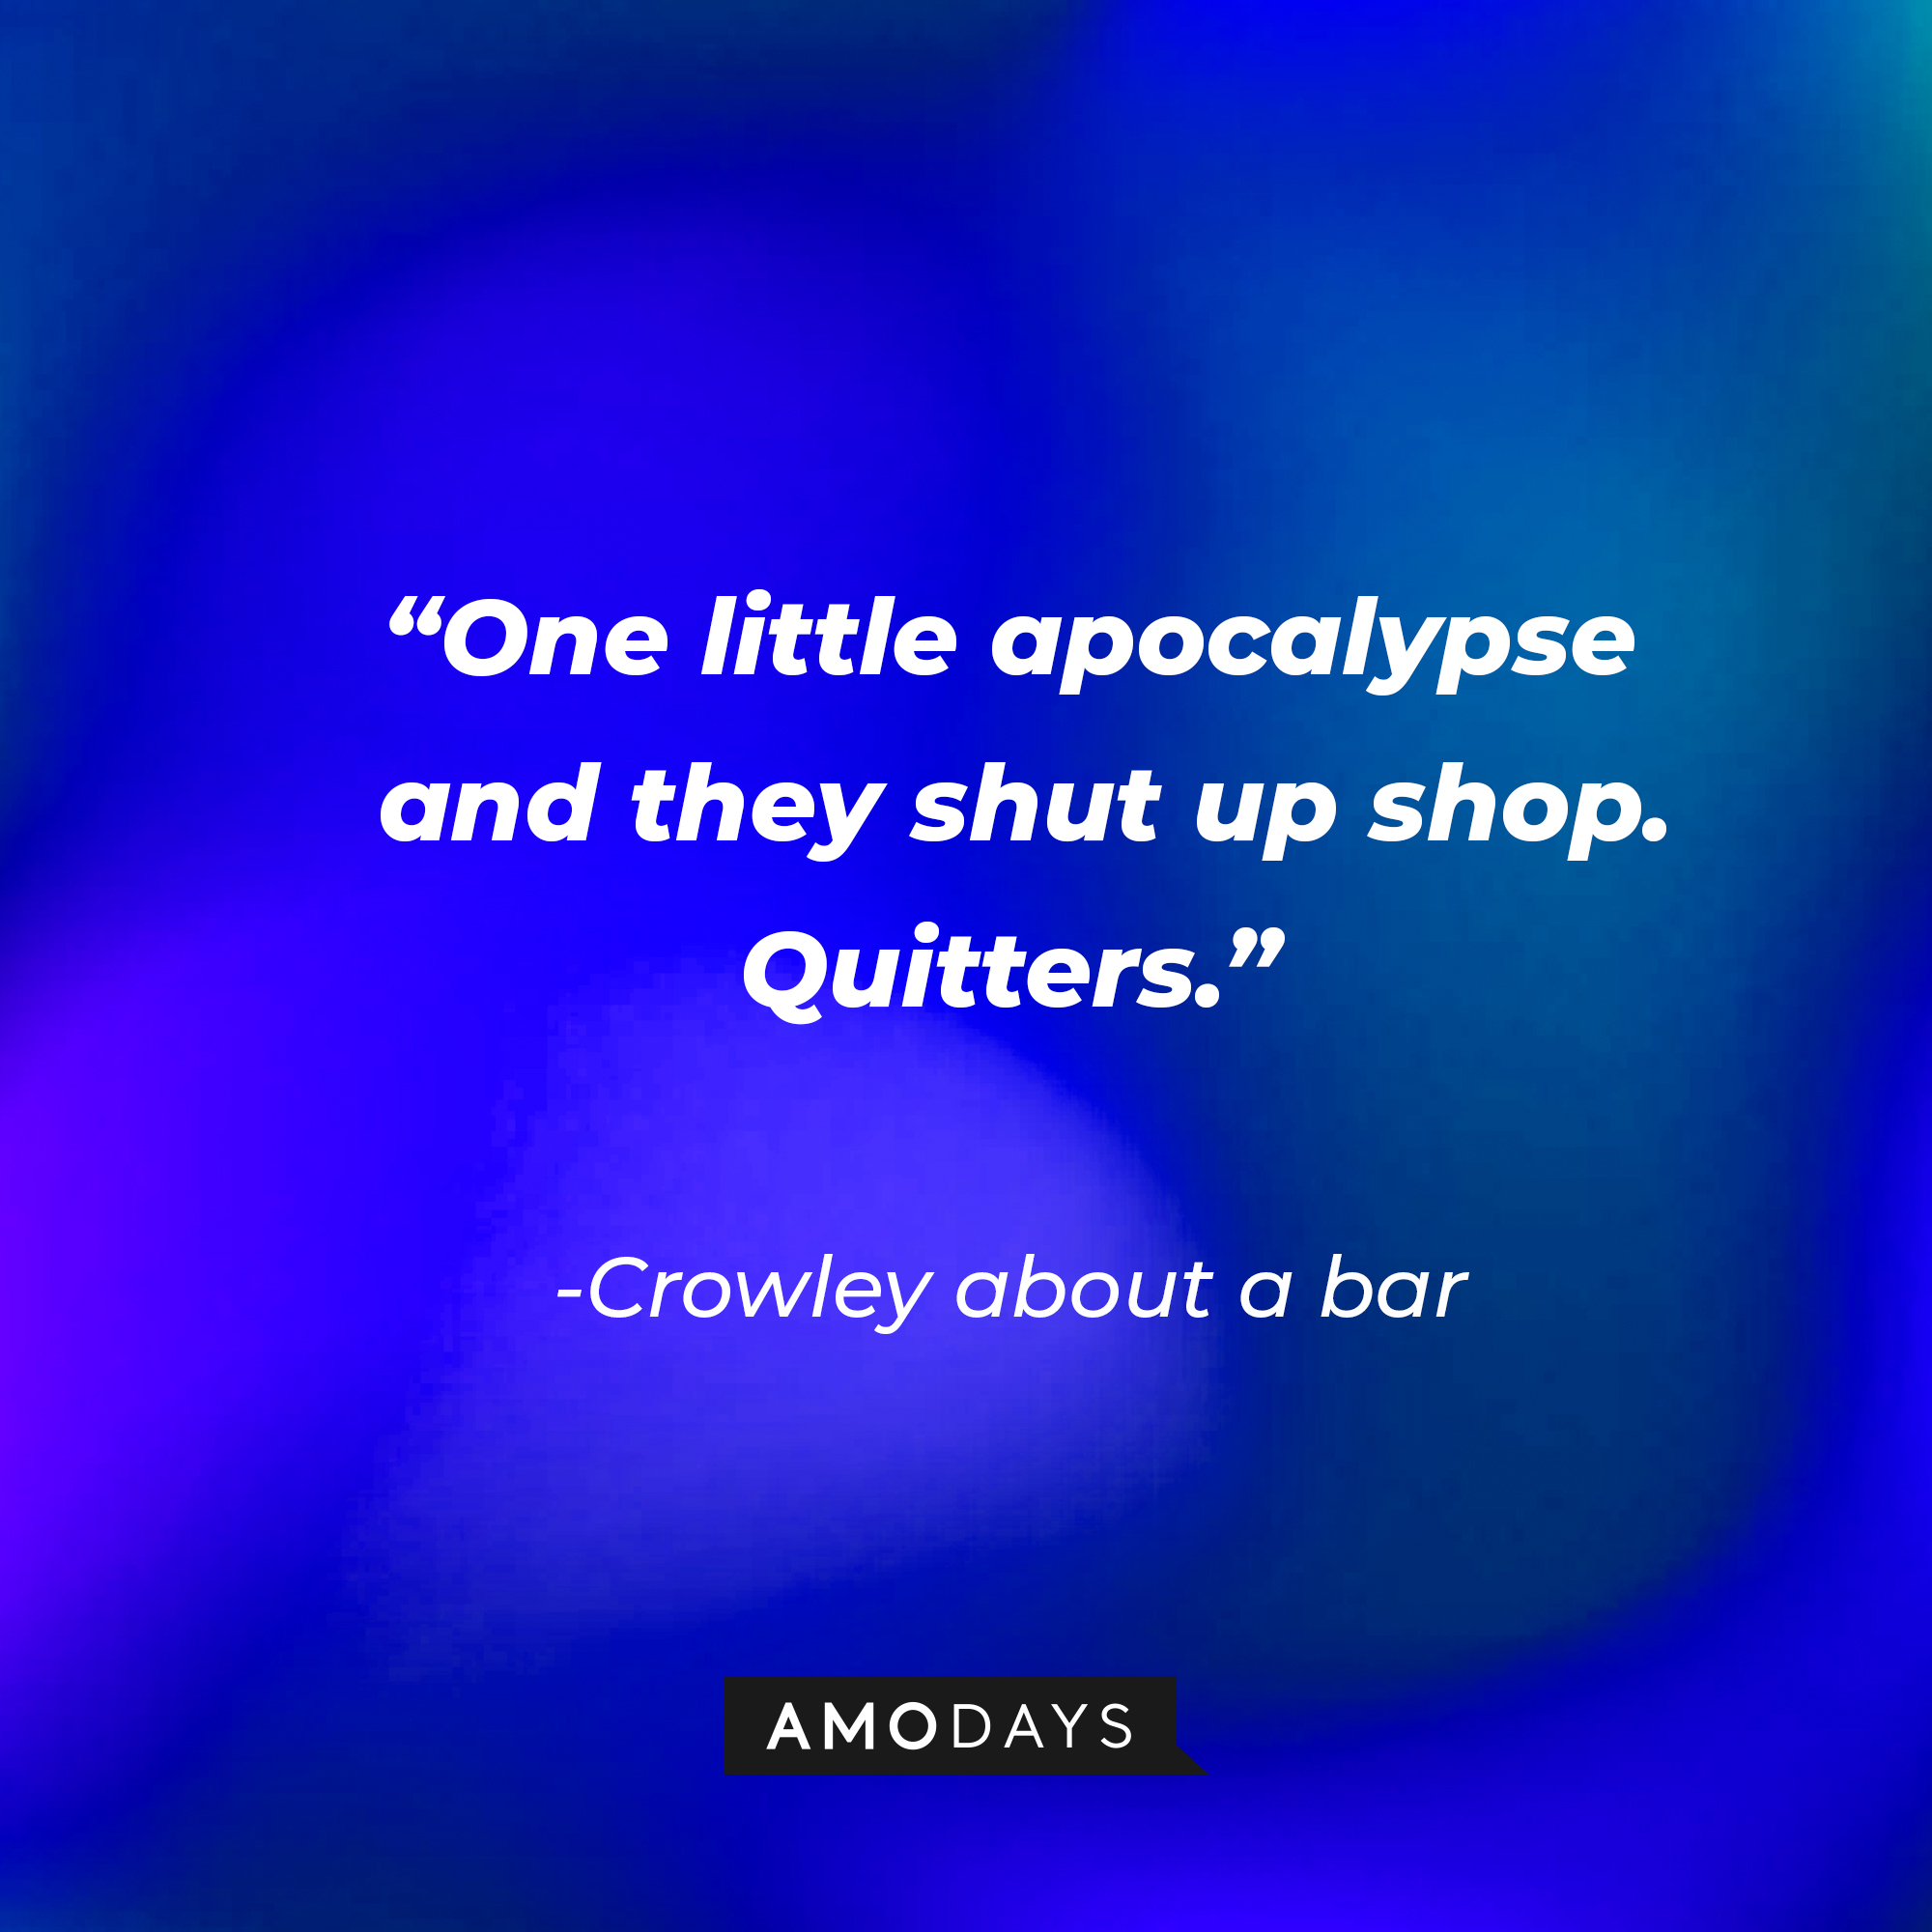 A quote from Crowley about the bar: "One little apocalypse and they shut up shop. Quitters." | Source: AmoDays